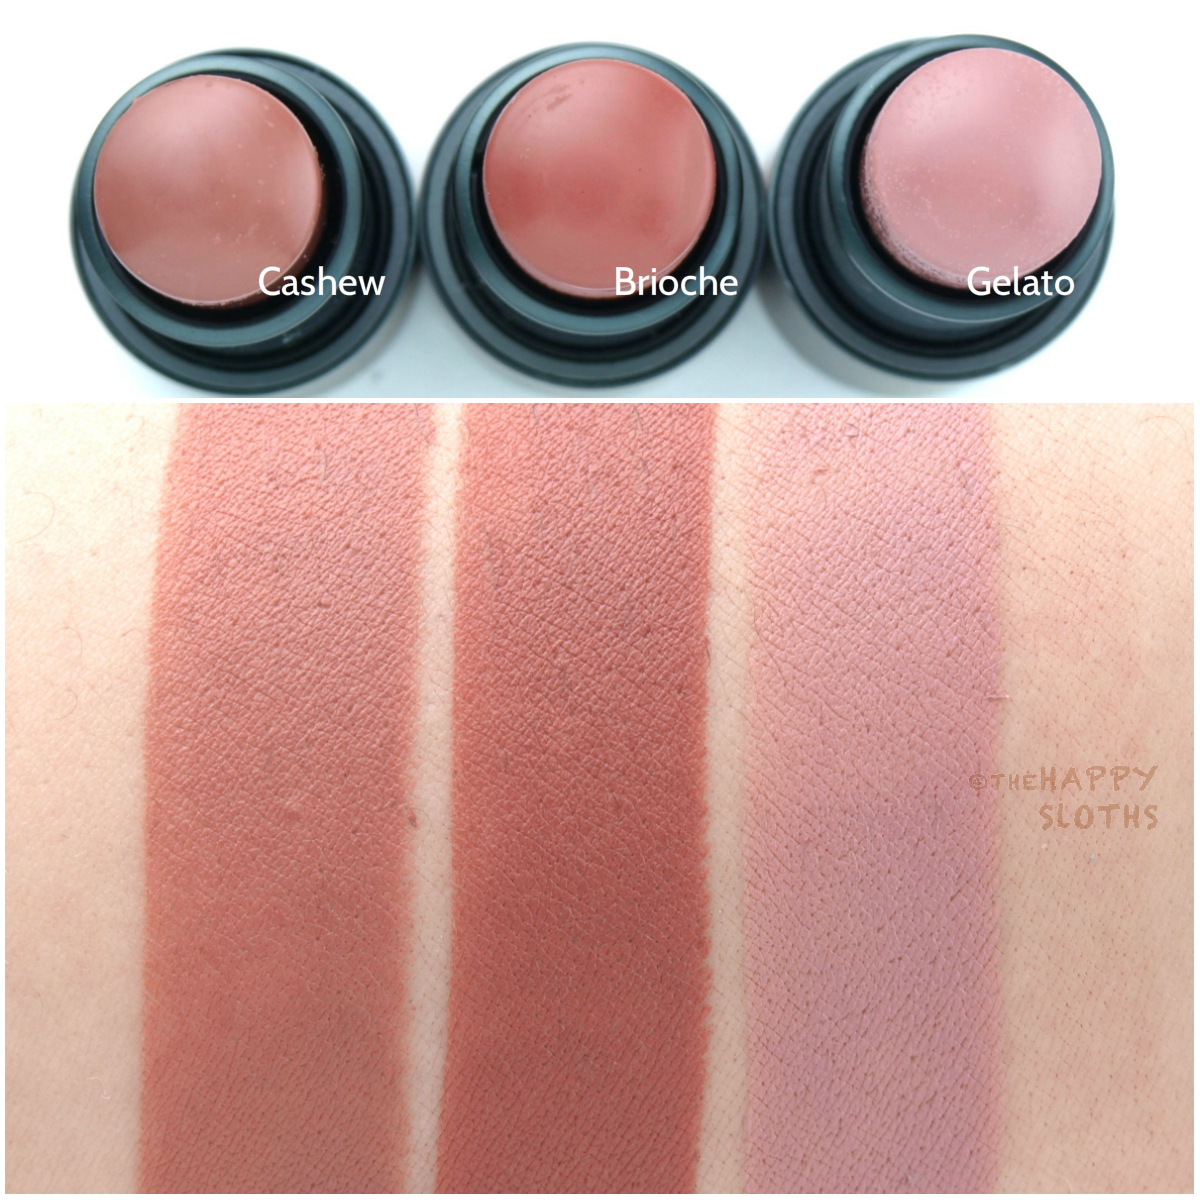 Bite Beauty Multistick Review and Swatches